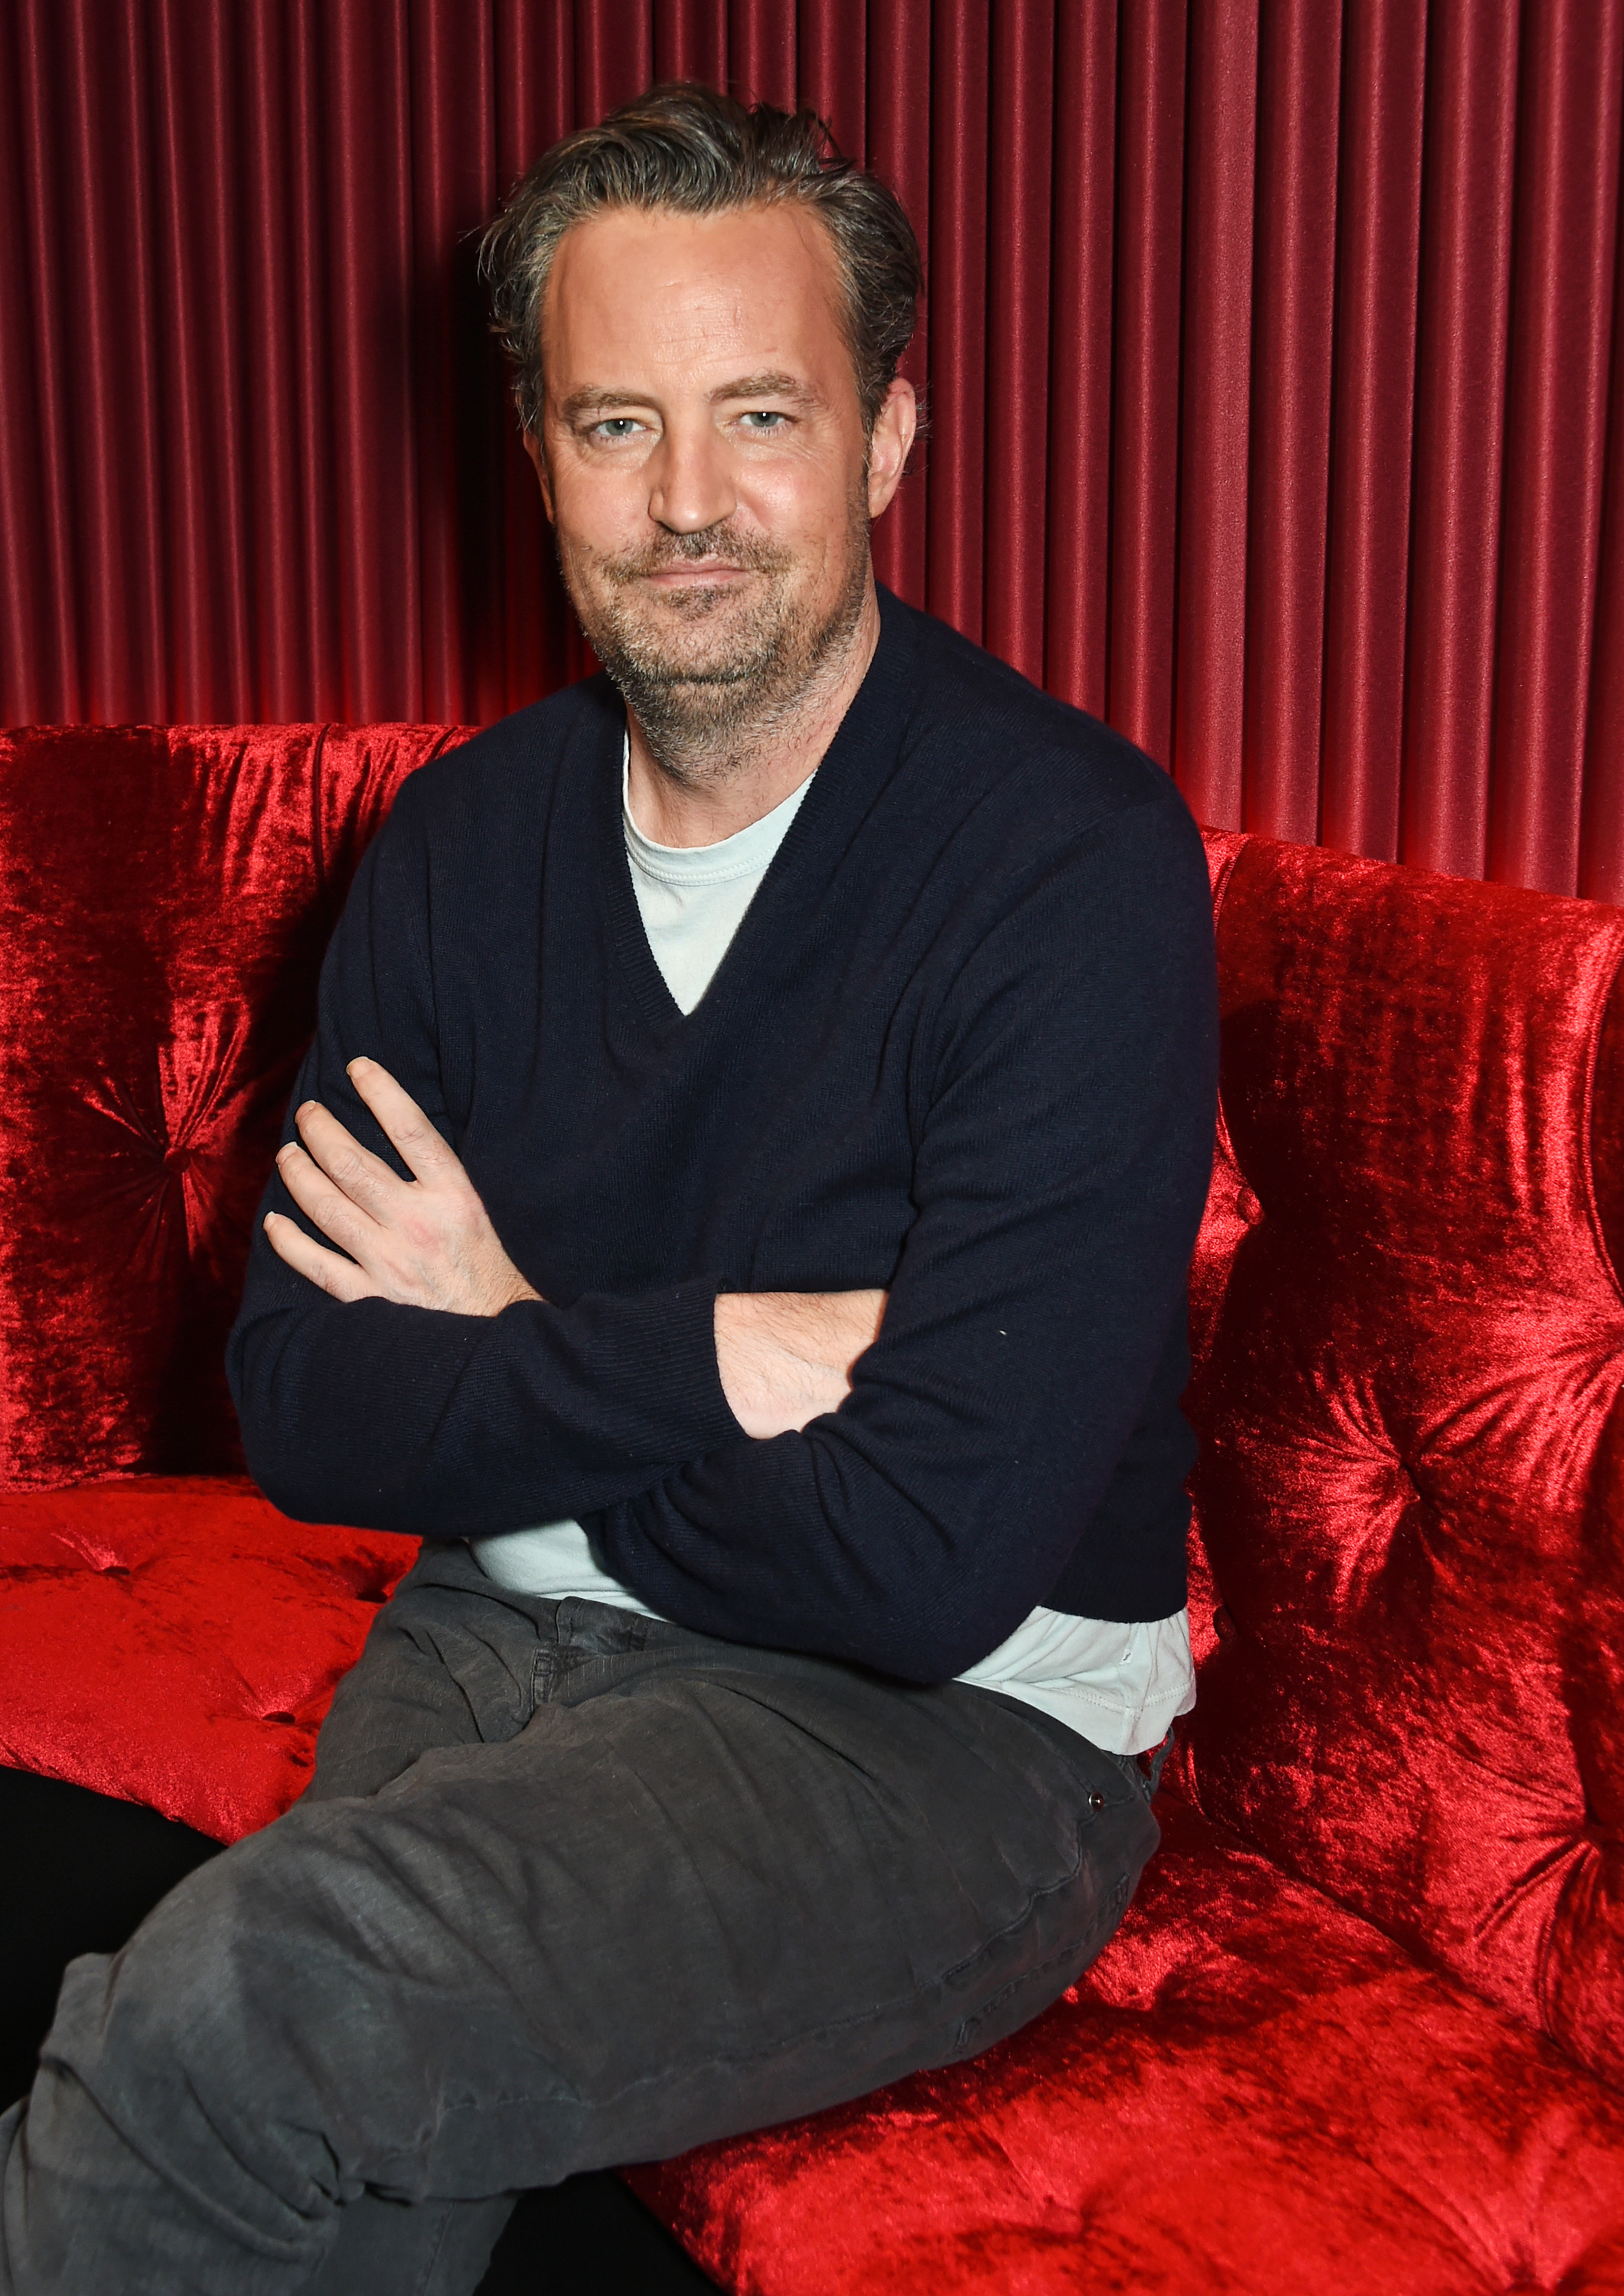 Matthew Perry poses at a photocall for "The End Of Longing" in London, England on February 8, 2016. | Source: Getty Images